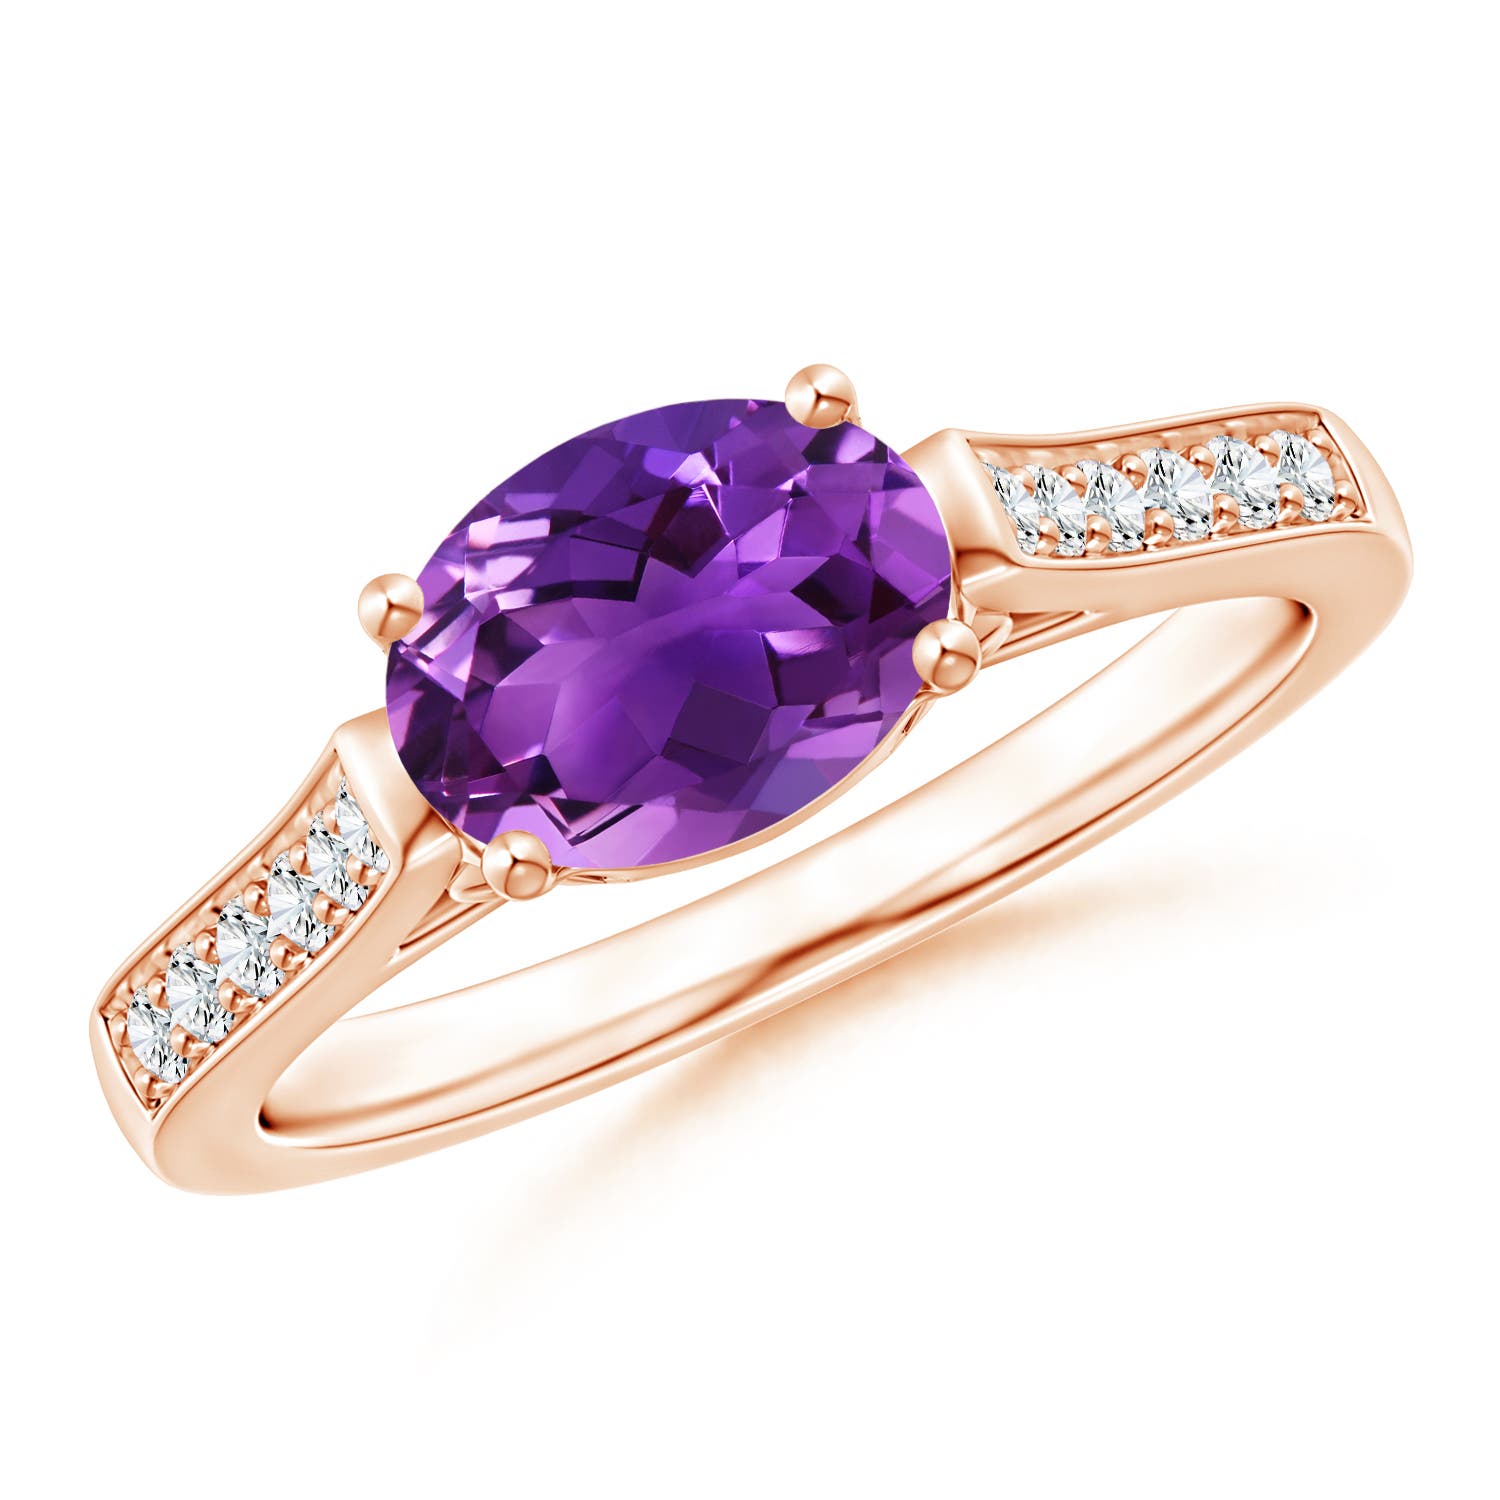 14K Rose Gold Soviet Amethyst Ring Size 6.5 Circa 1980 - Colonial Trading  Company